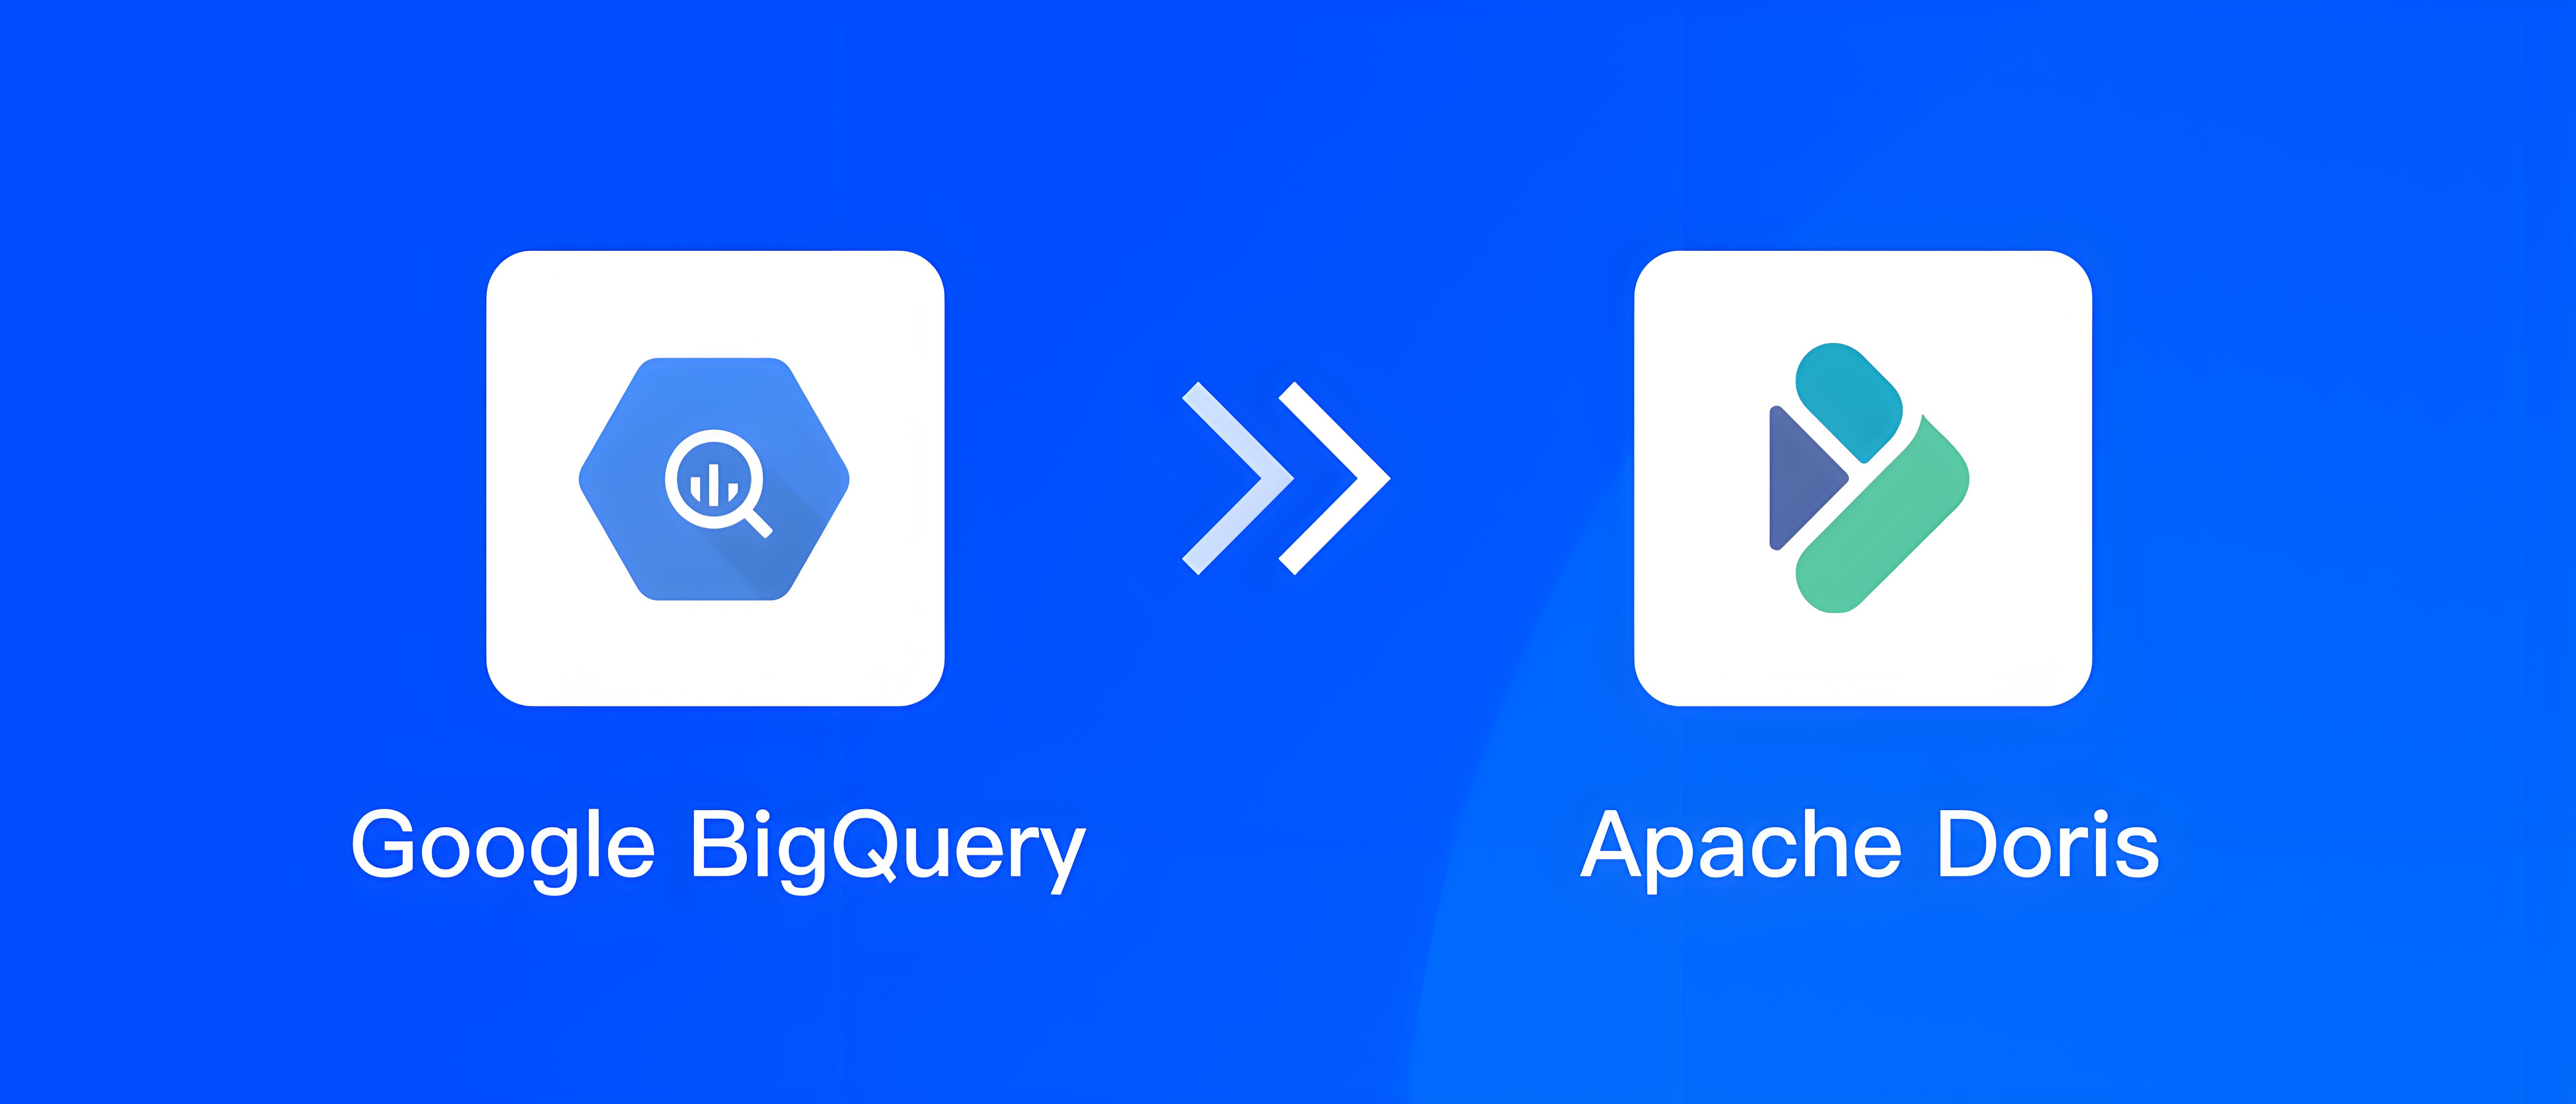 Migrate data lakehouse from BigQuery to Apache Doris, saving $4,500 per month 